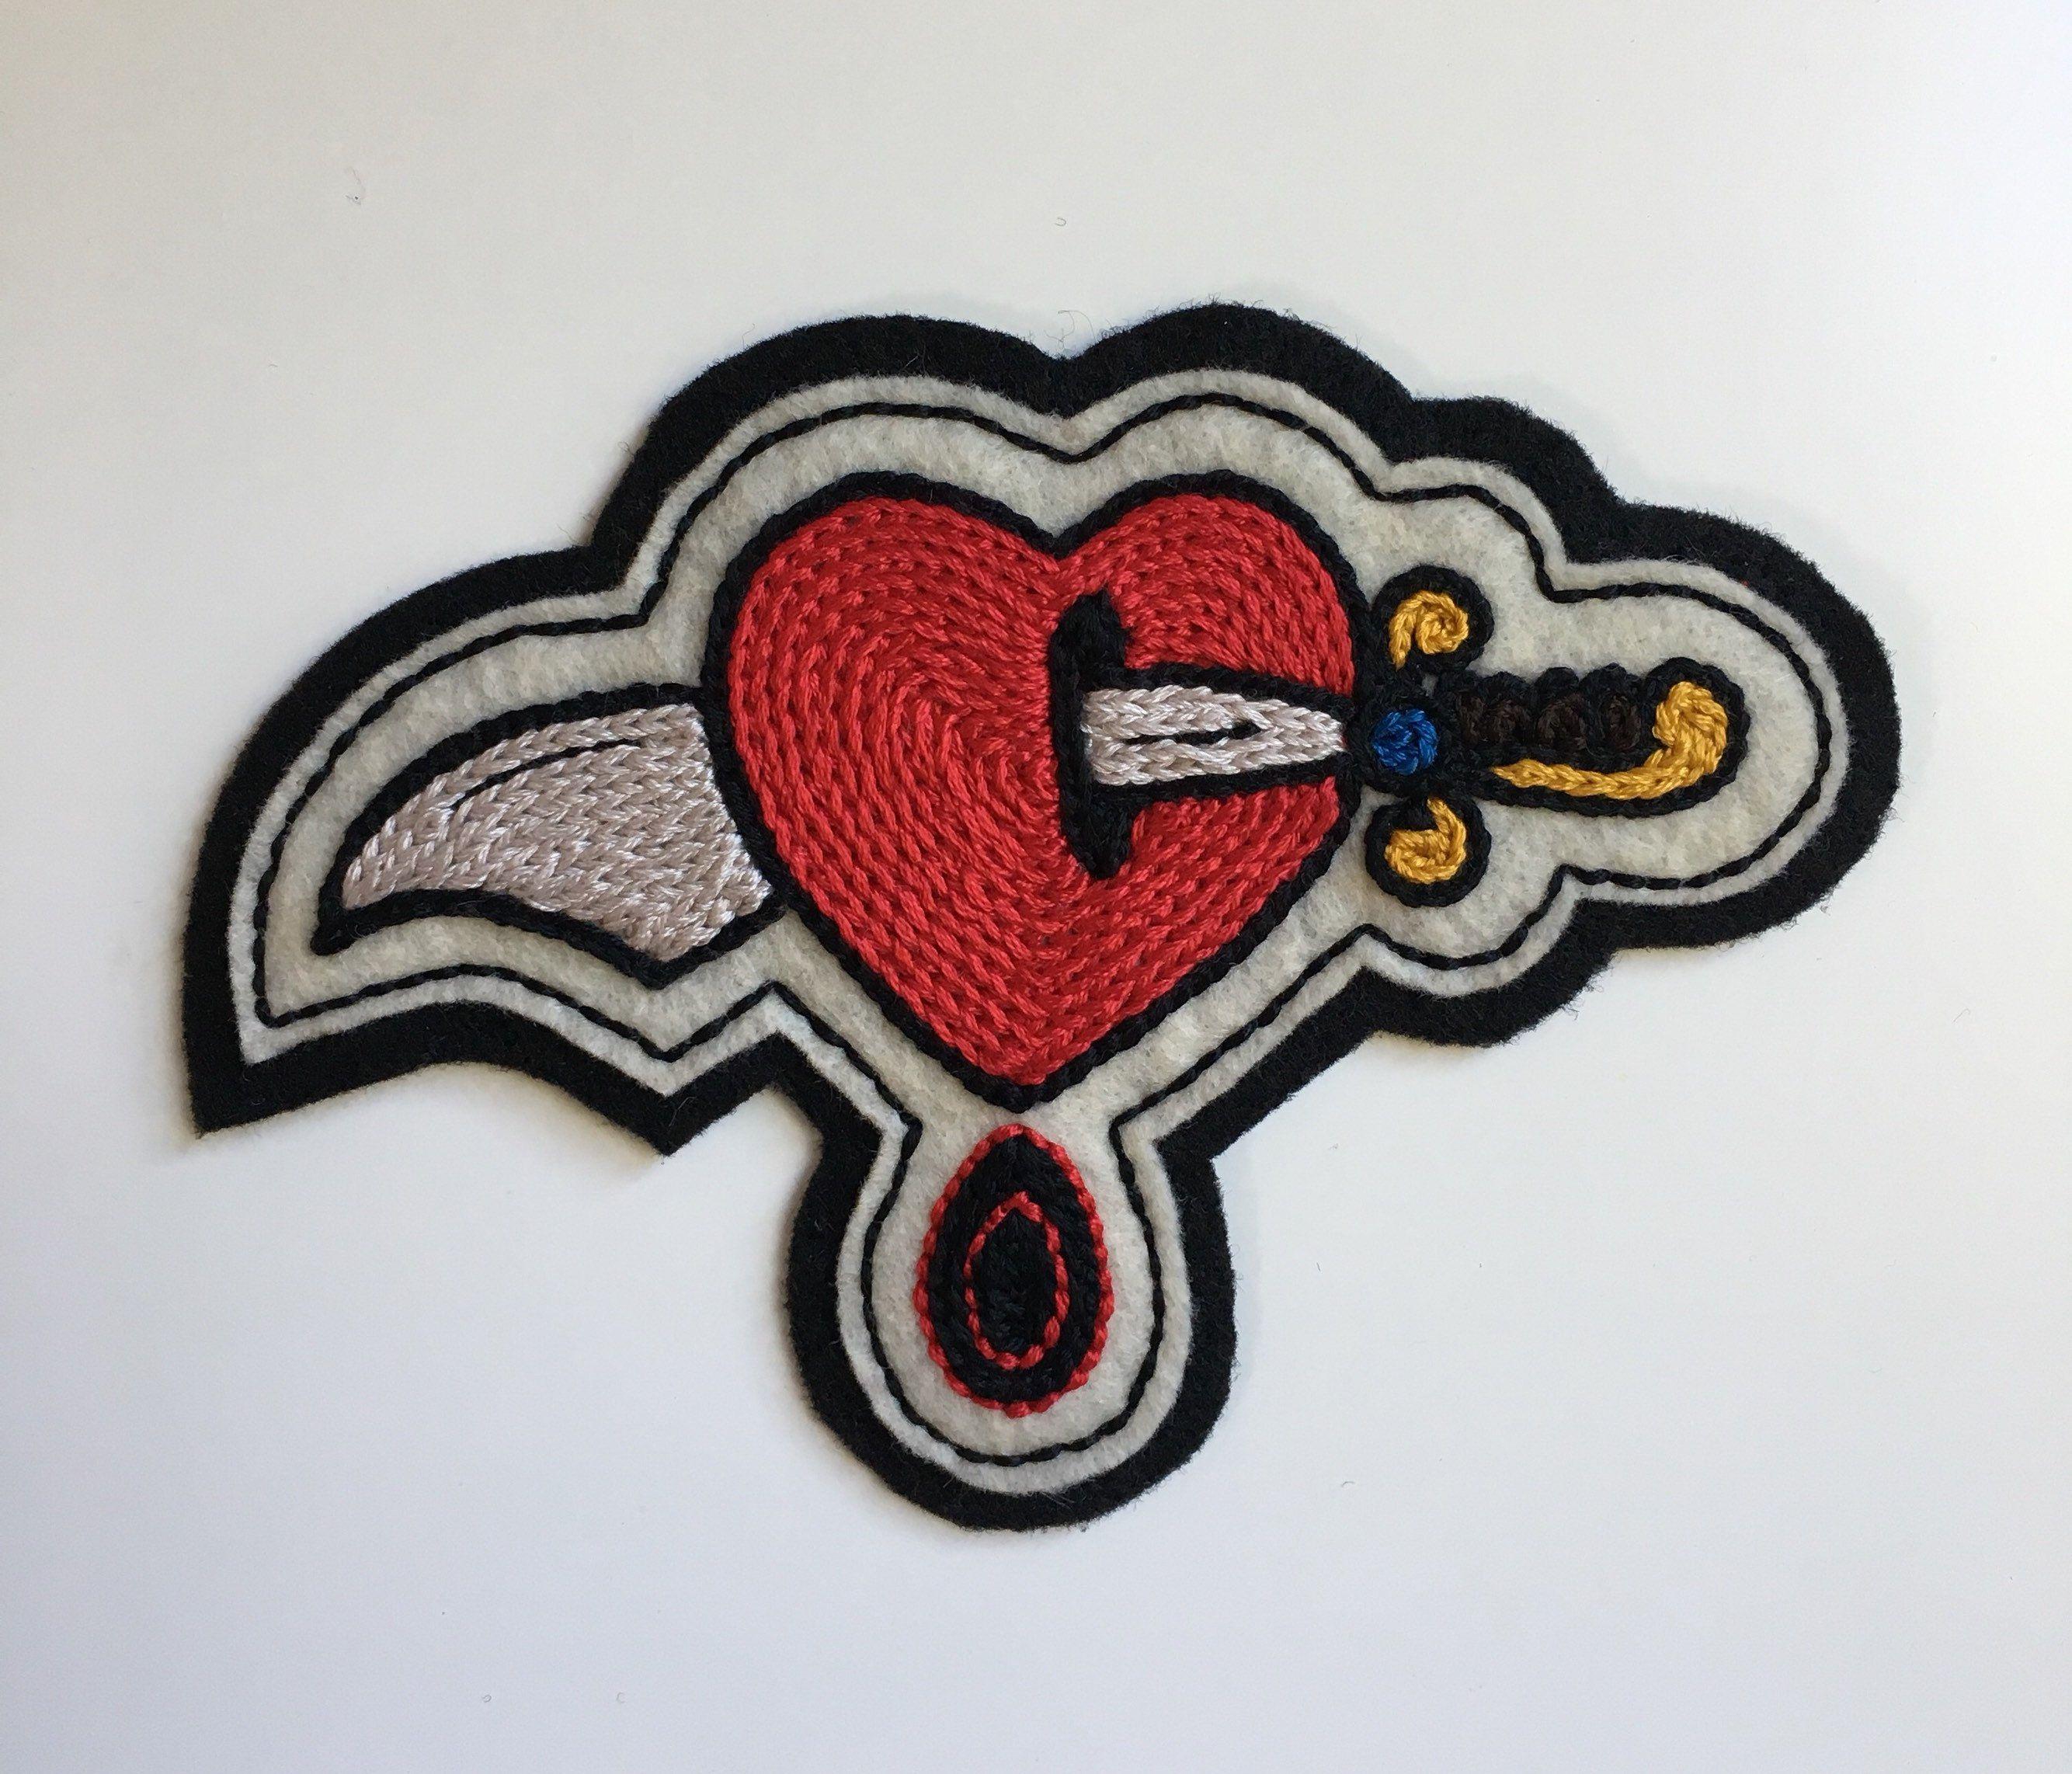 White with Red Tear Drop Logo - Handmade / hand embroidered black & off white felt patch